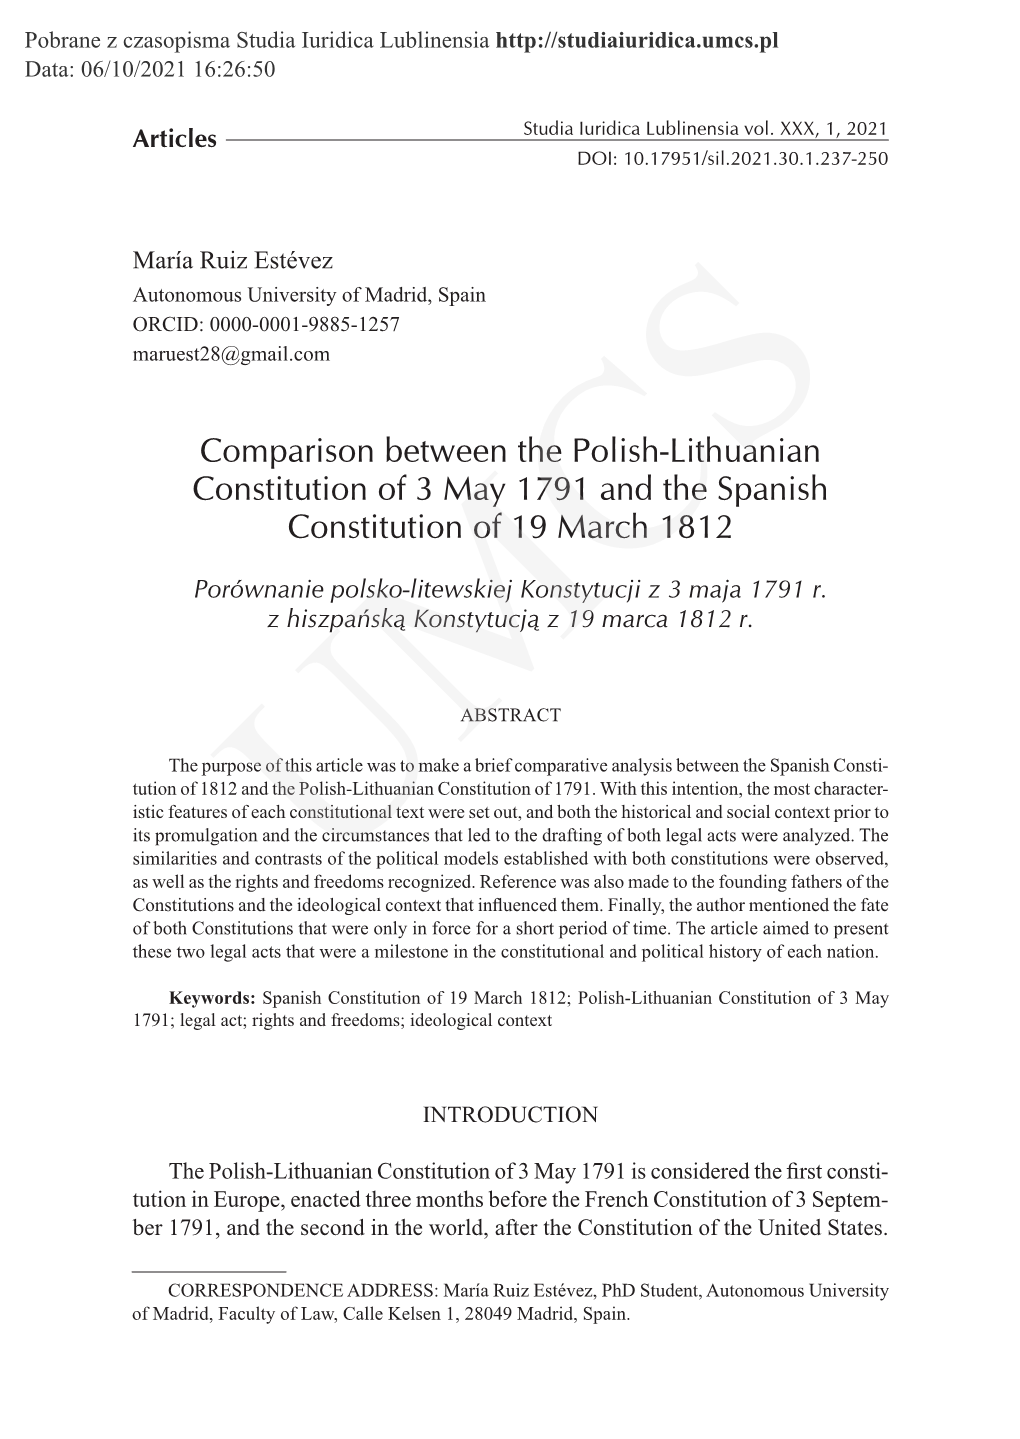 Comparison Between the Polish-Lithuanian Constitution of 3 May 1791 and the Spanish Constitution of 19 March 1812